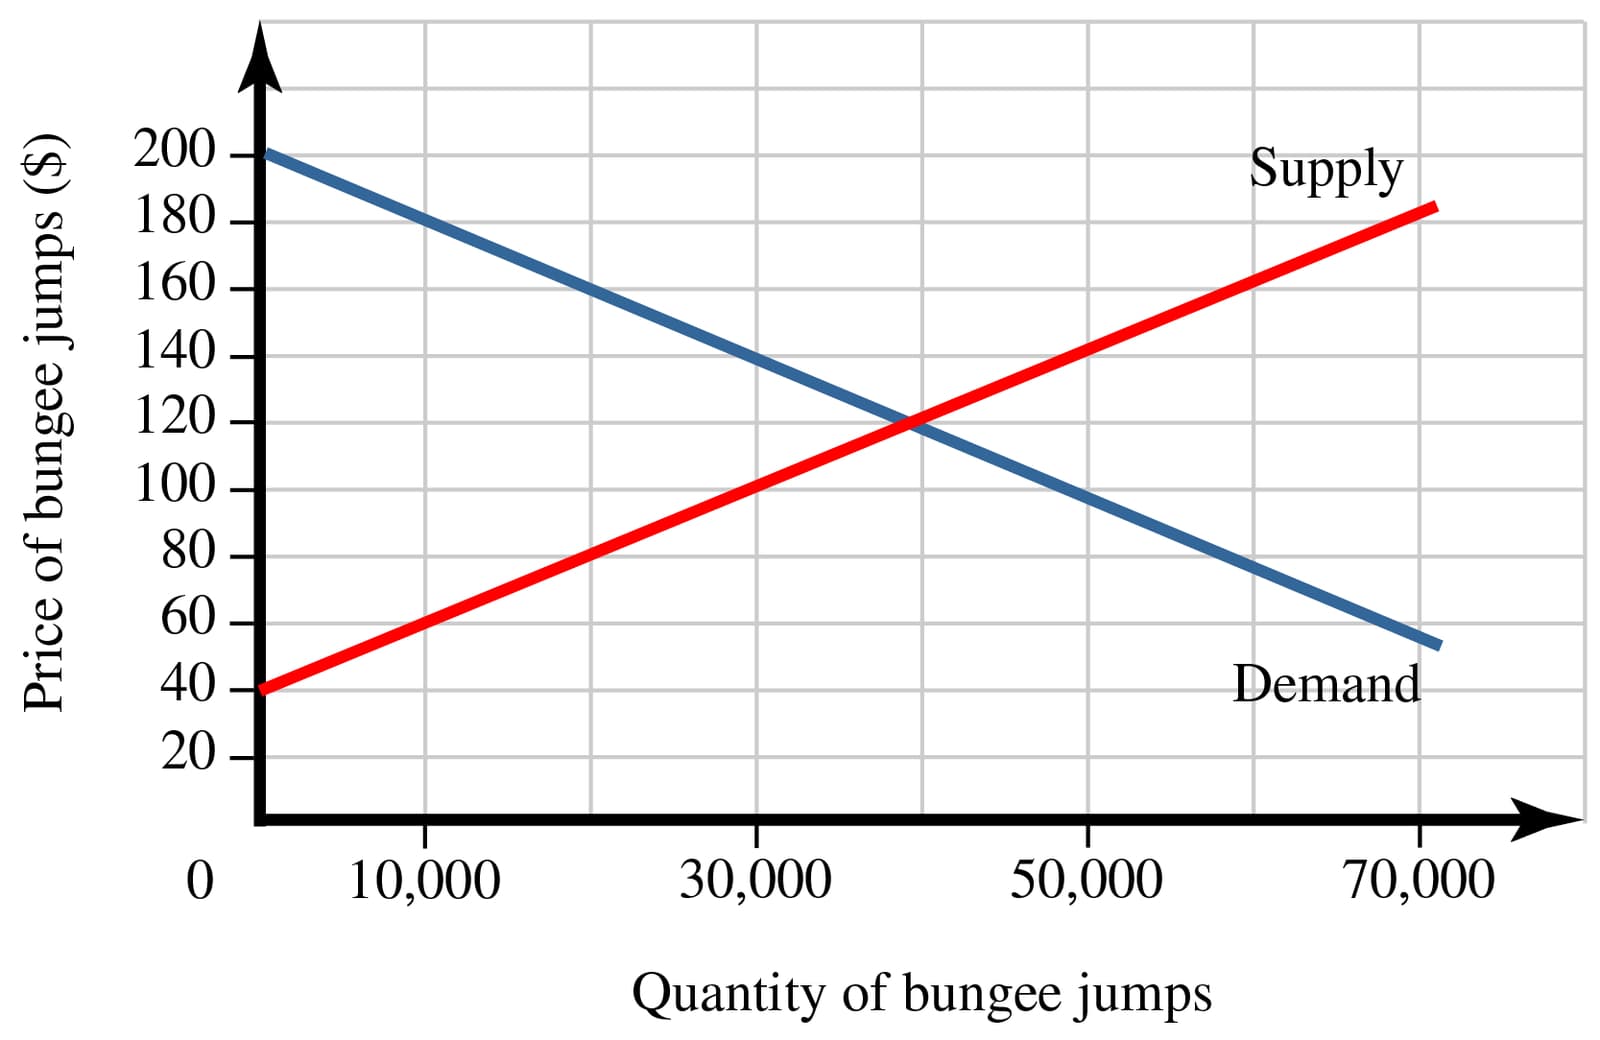 200
Supply
180
160
140
120
100
80
60
40
Demand
20
10,000
30,000
50,000
70,000
Quantity of bungee jumps
Price of bungee jumps ($)
